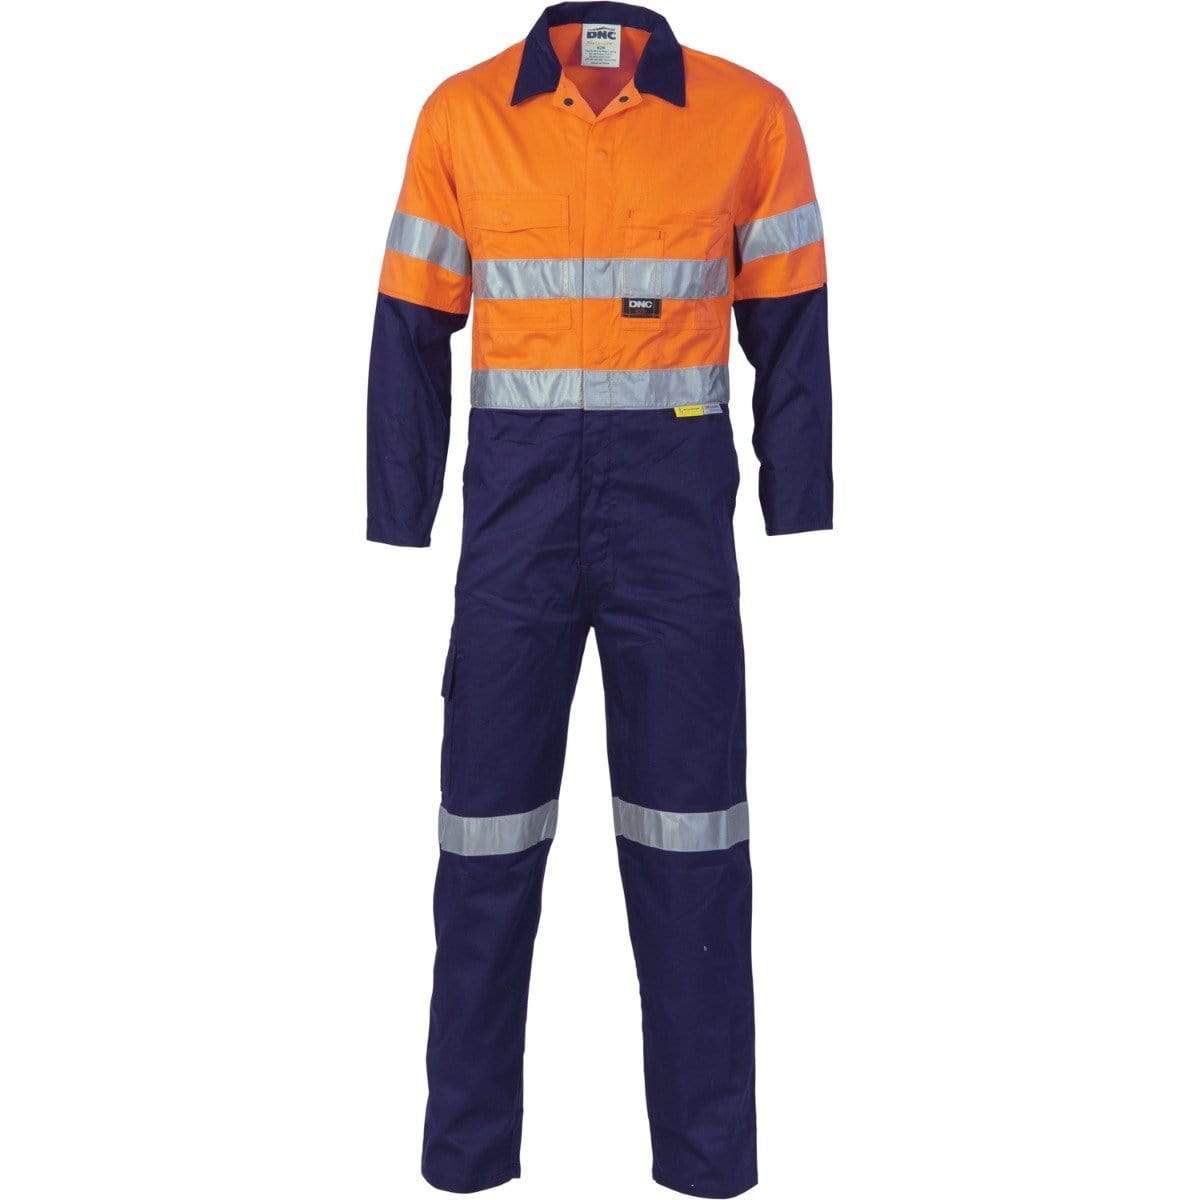 Dnc Workwear Hi-vis Cool-breeze Two-tone Lightweight Cotton Coverall With 3m Reflective Tape - 3955 Work Wear DNC Workwear Orange/Navy 77R 